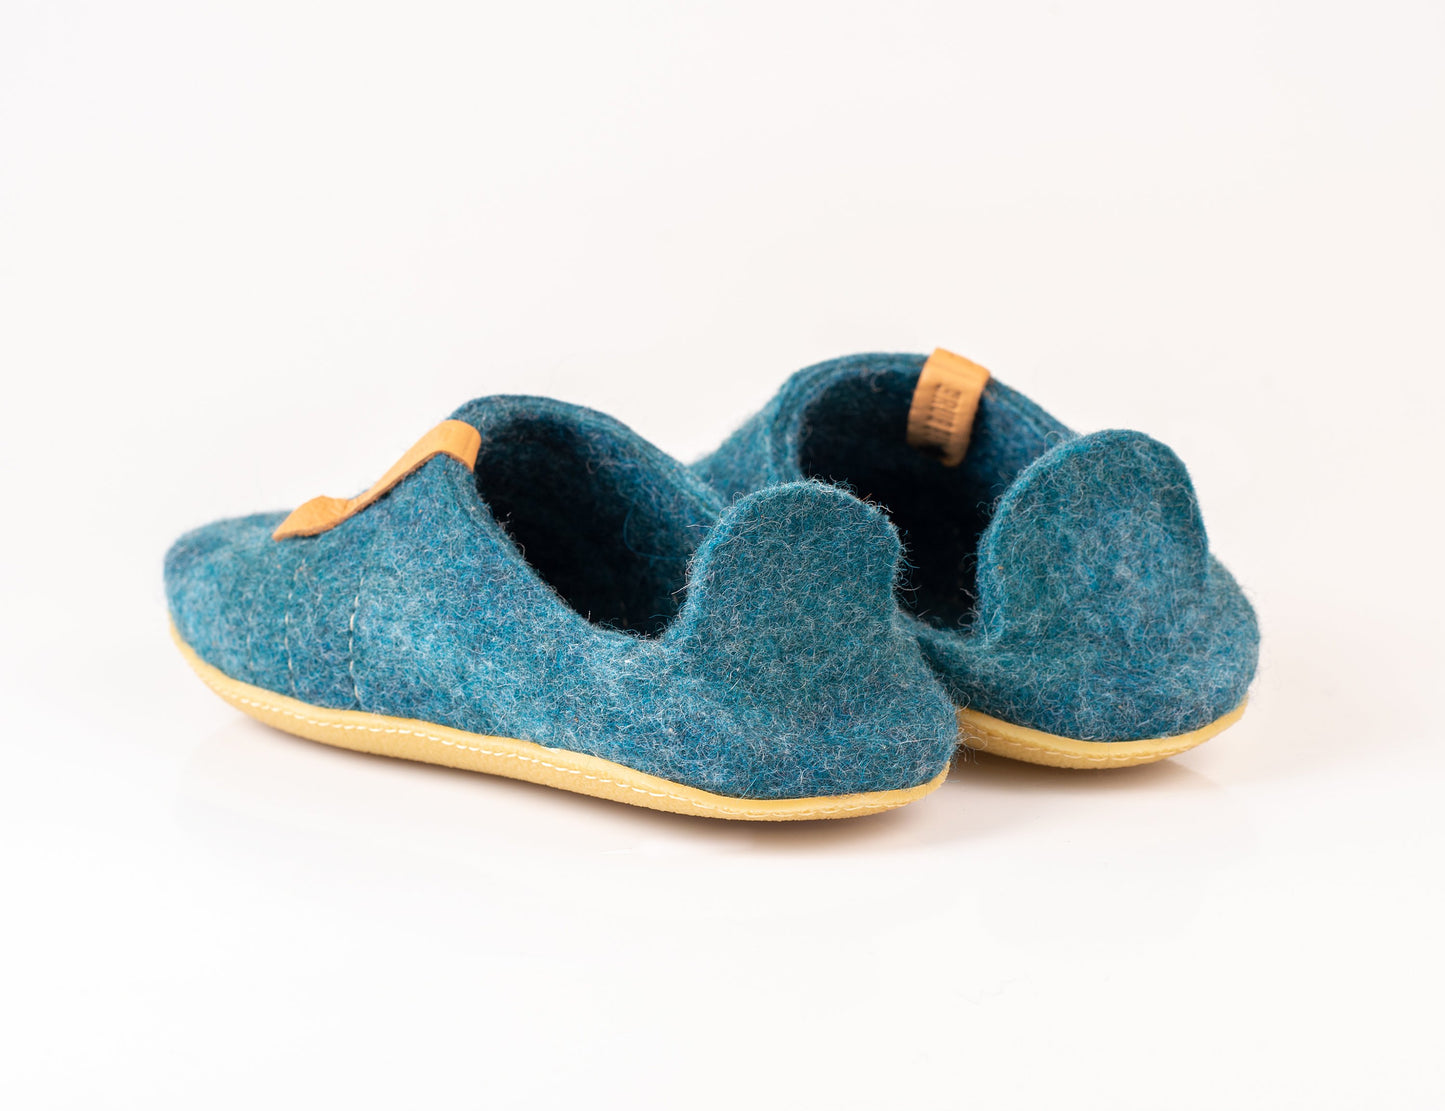 Collapsible felted wool slippers: backless slippers that turn into low-back clogs